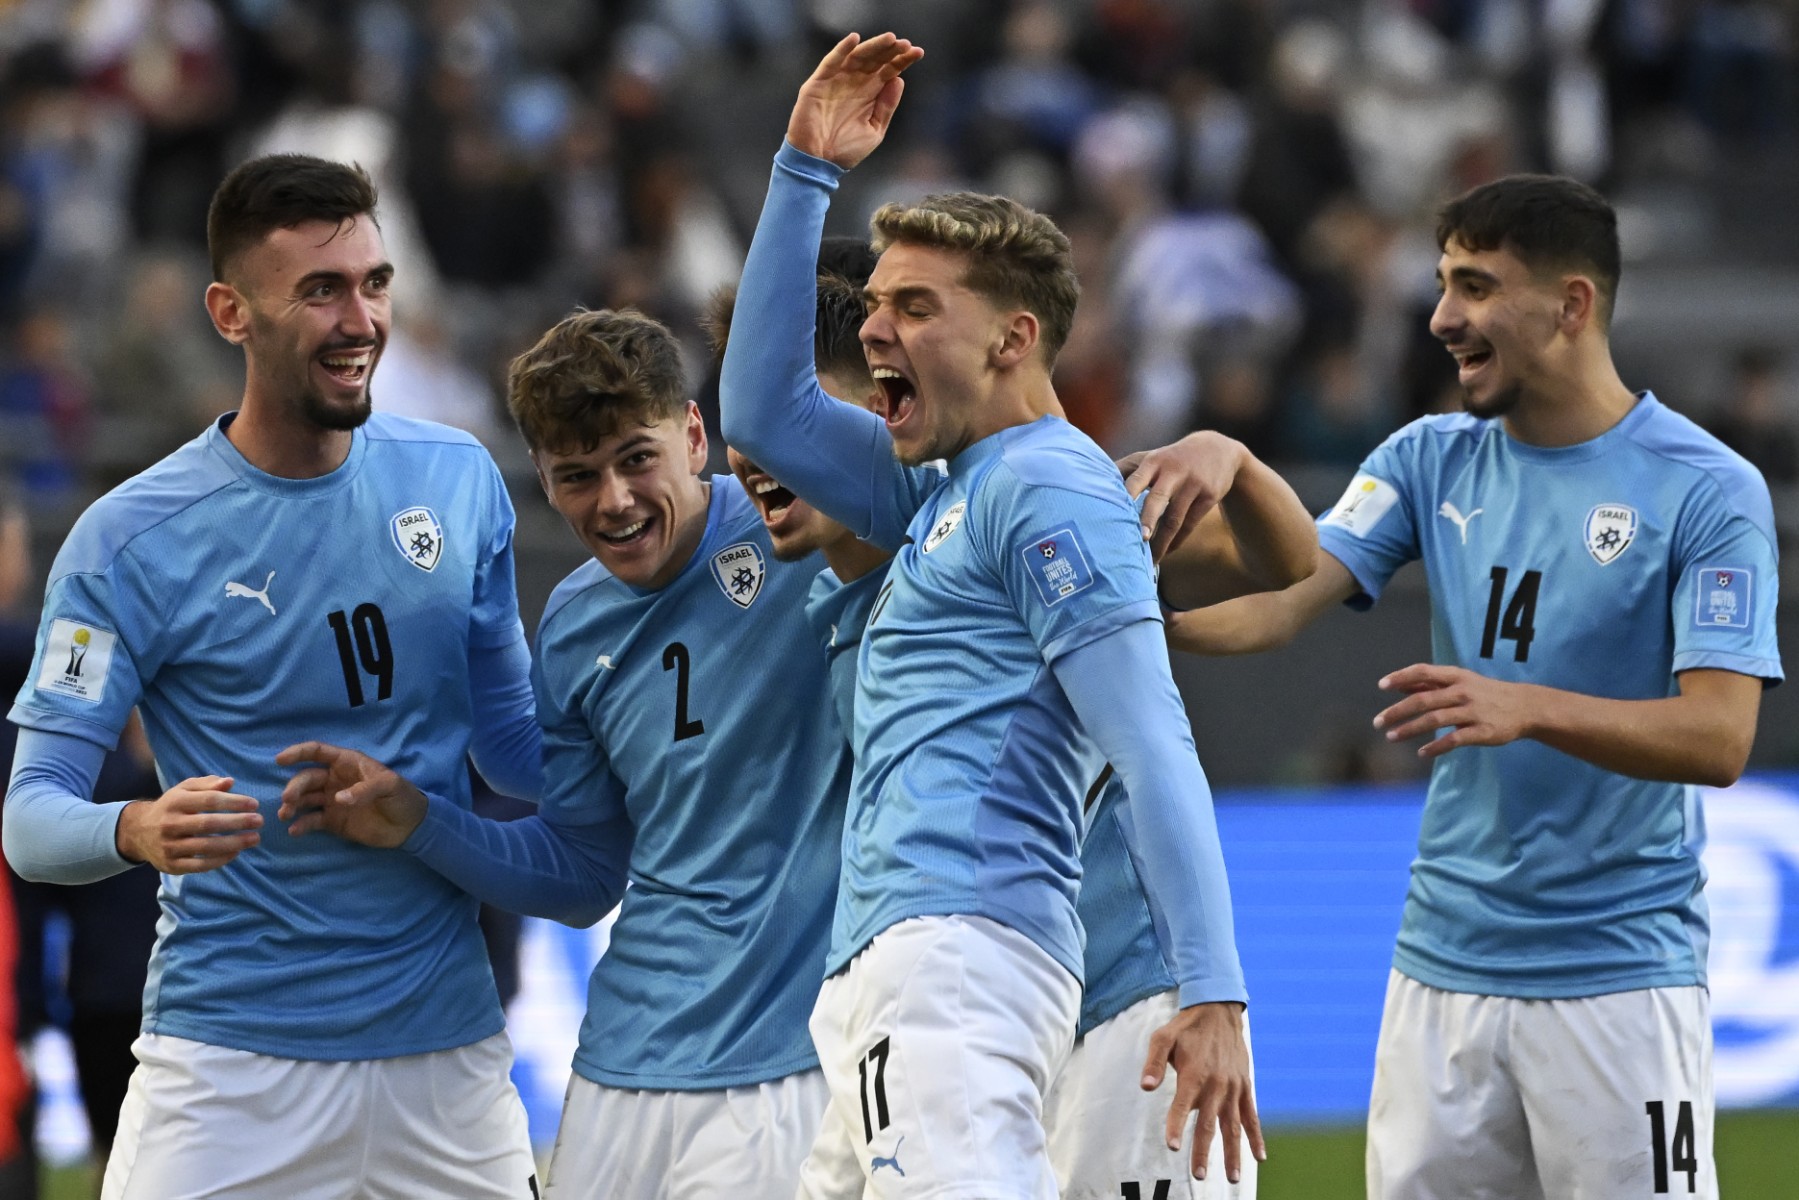 Israel clinches 3rd place in soccer's U-20 World Cup, capping thrilling run